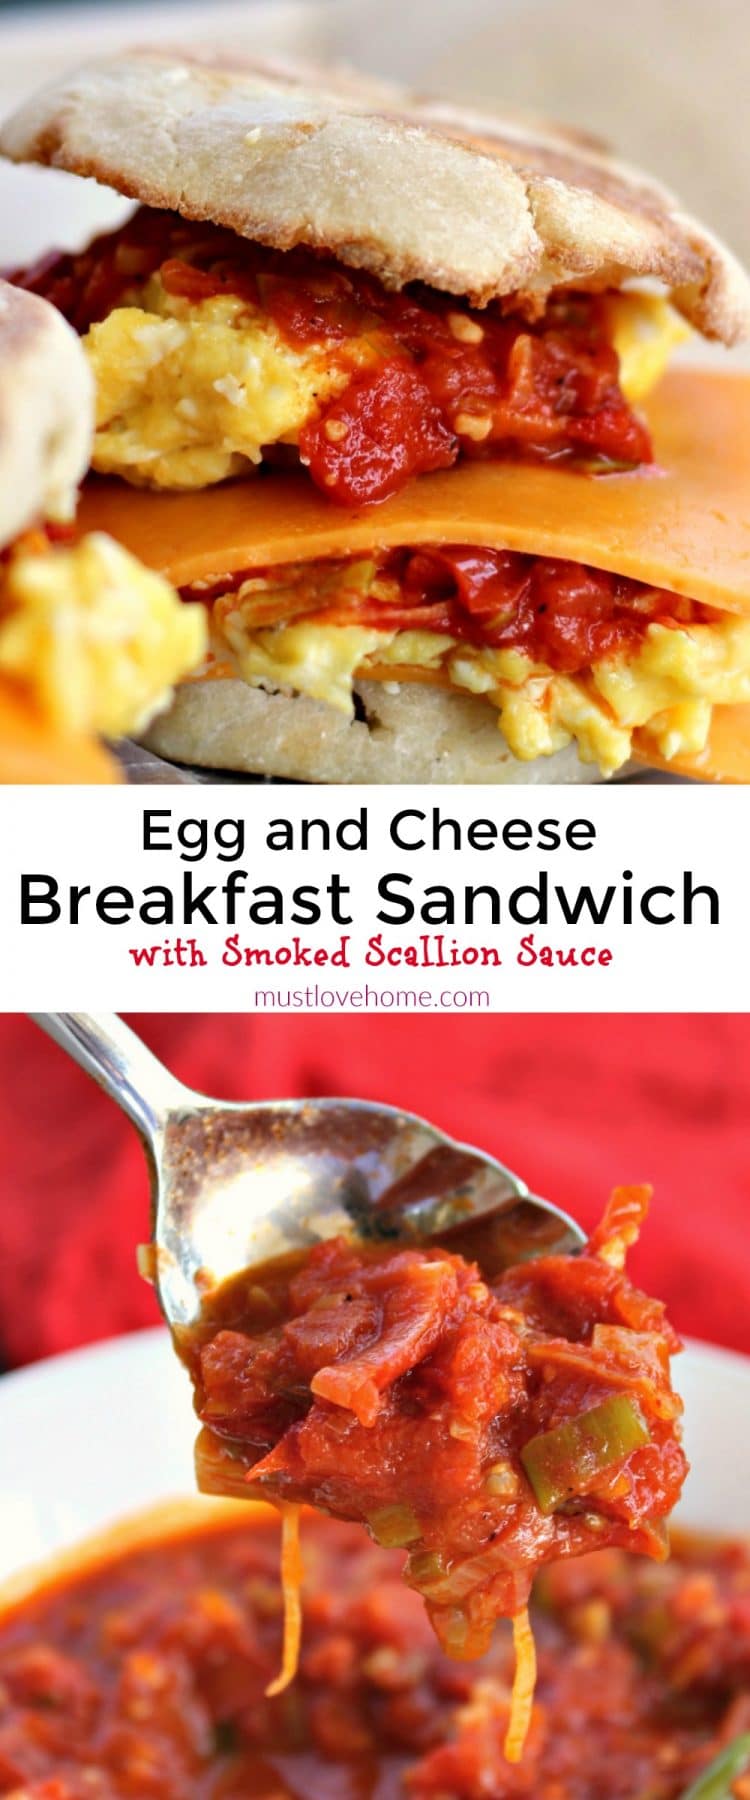 Egg and Cheese Breakfast Sandwich with Smoked Scallion Sauce is packed with flavor from the incredible smoky tomato sauce. Smoked paprika is the secret to the sauce! You will want to double the recipe to pile on burgers and steaks too!